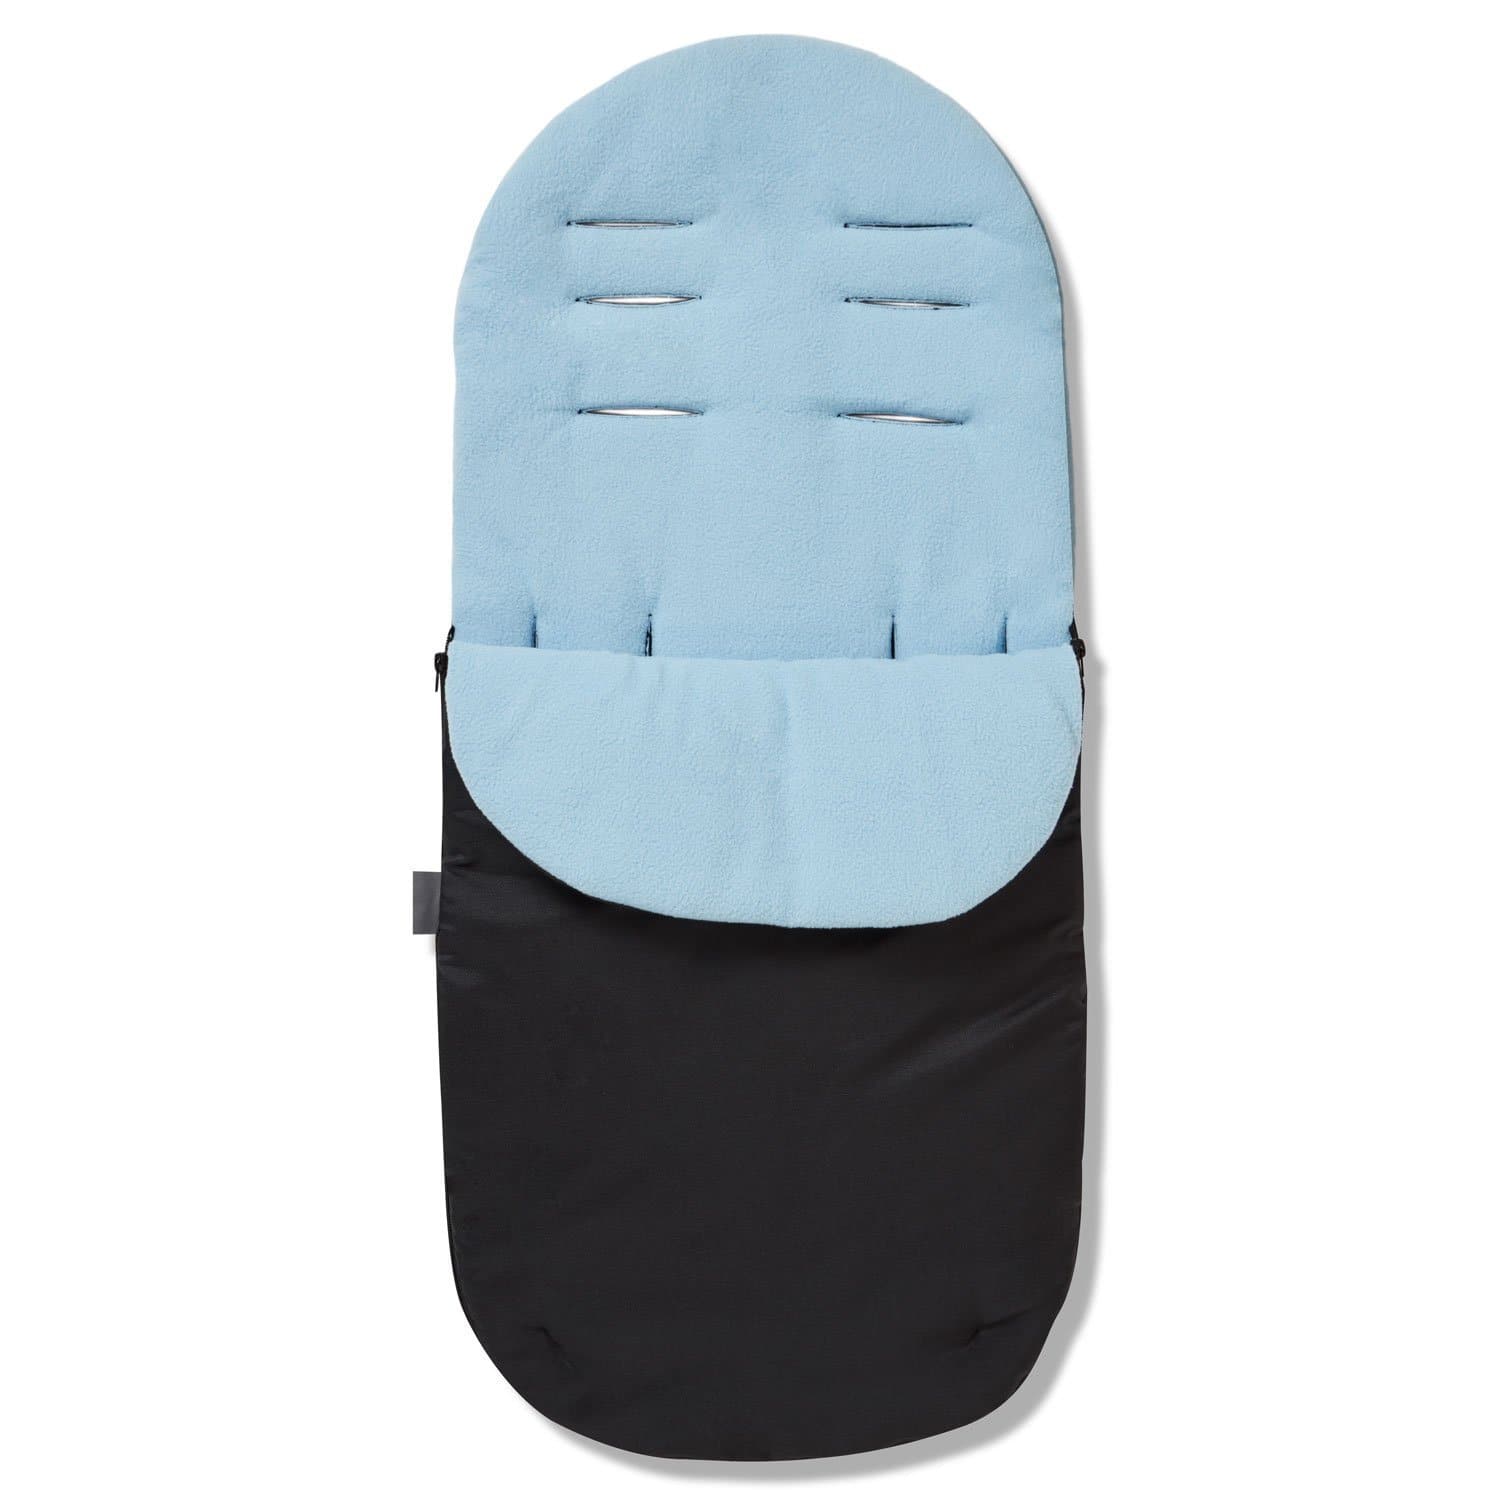 Footmuff / Cosy Toes Compatible with Mee-Go - Light Blue / Fits All Models | For Your Little One